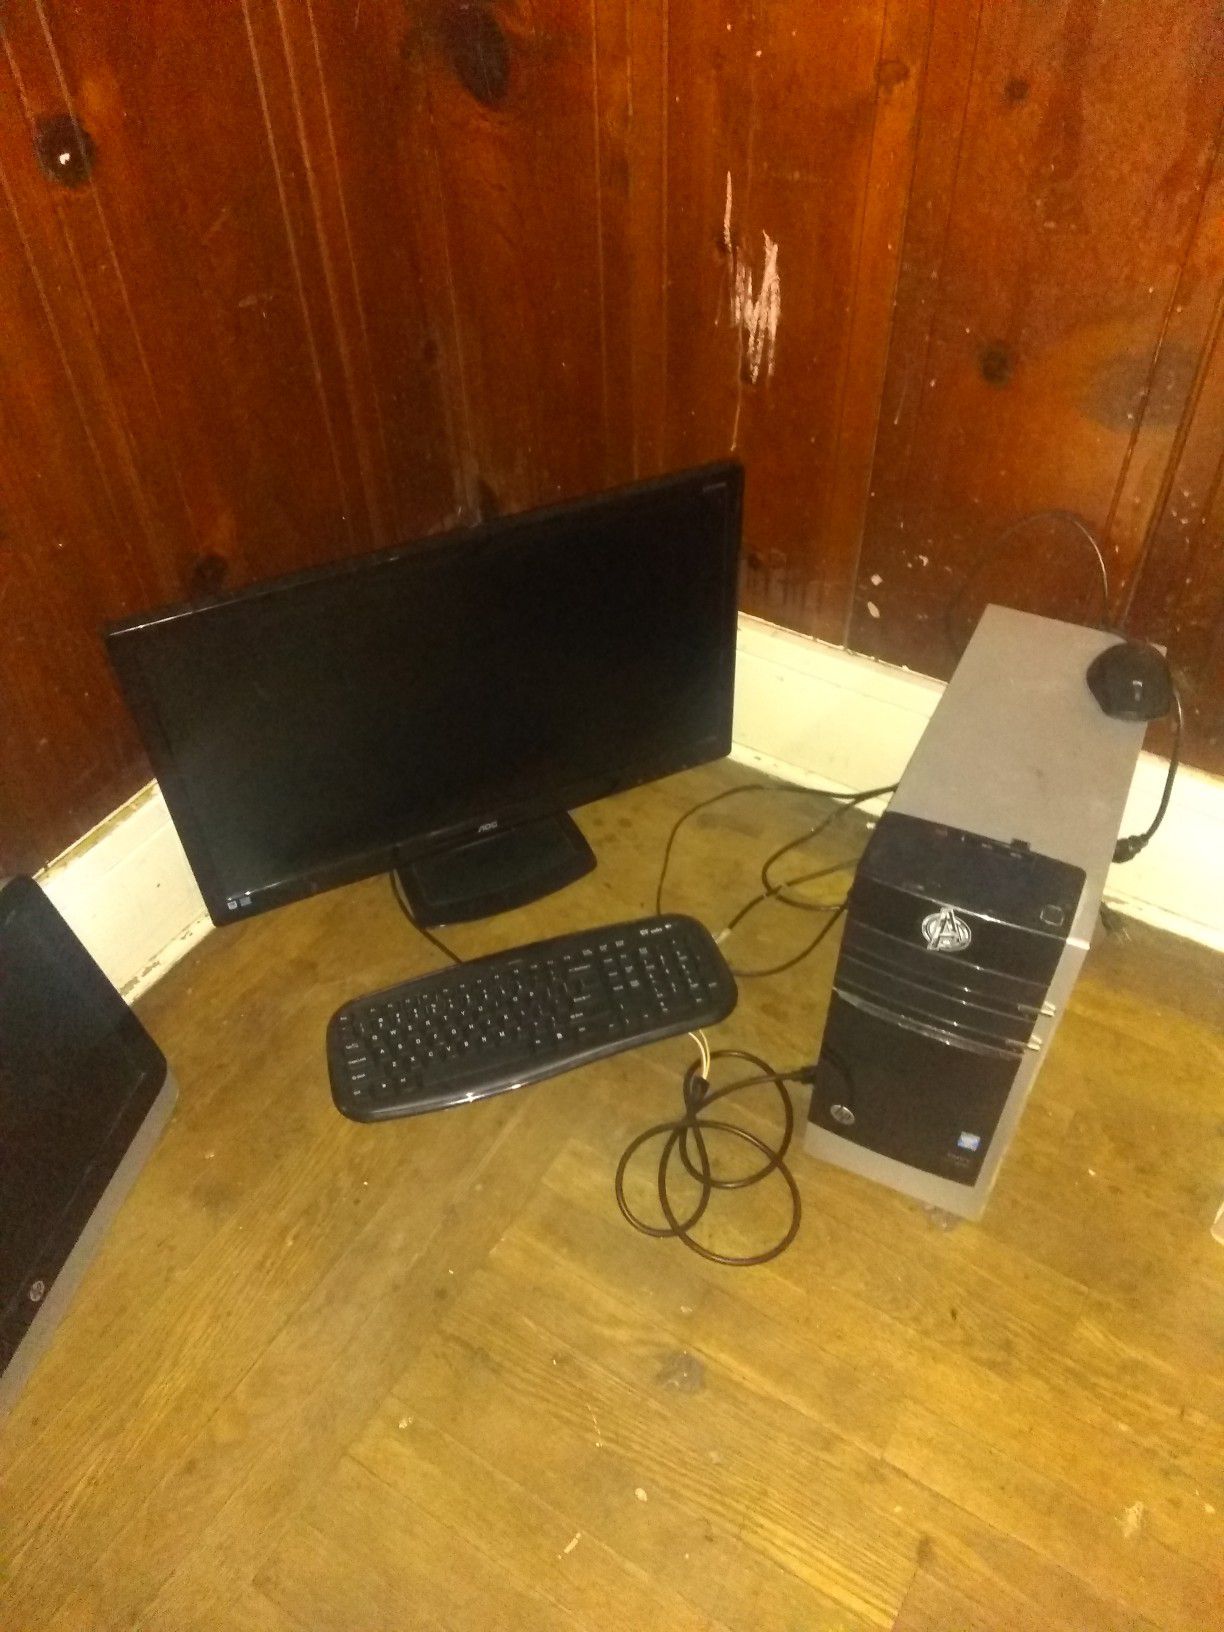 Computer with wireless keyboard and mouse. Big monitor